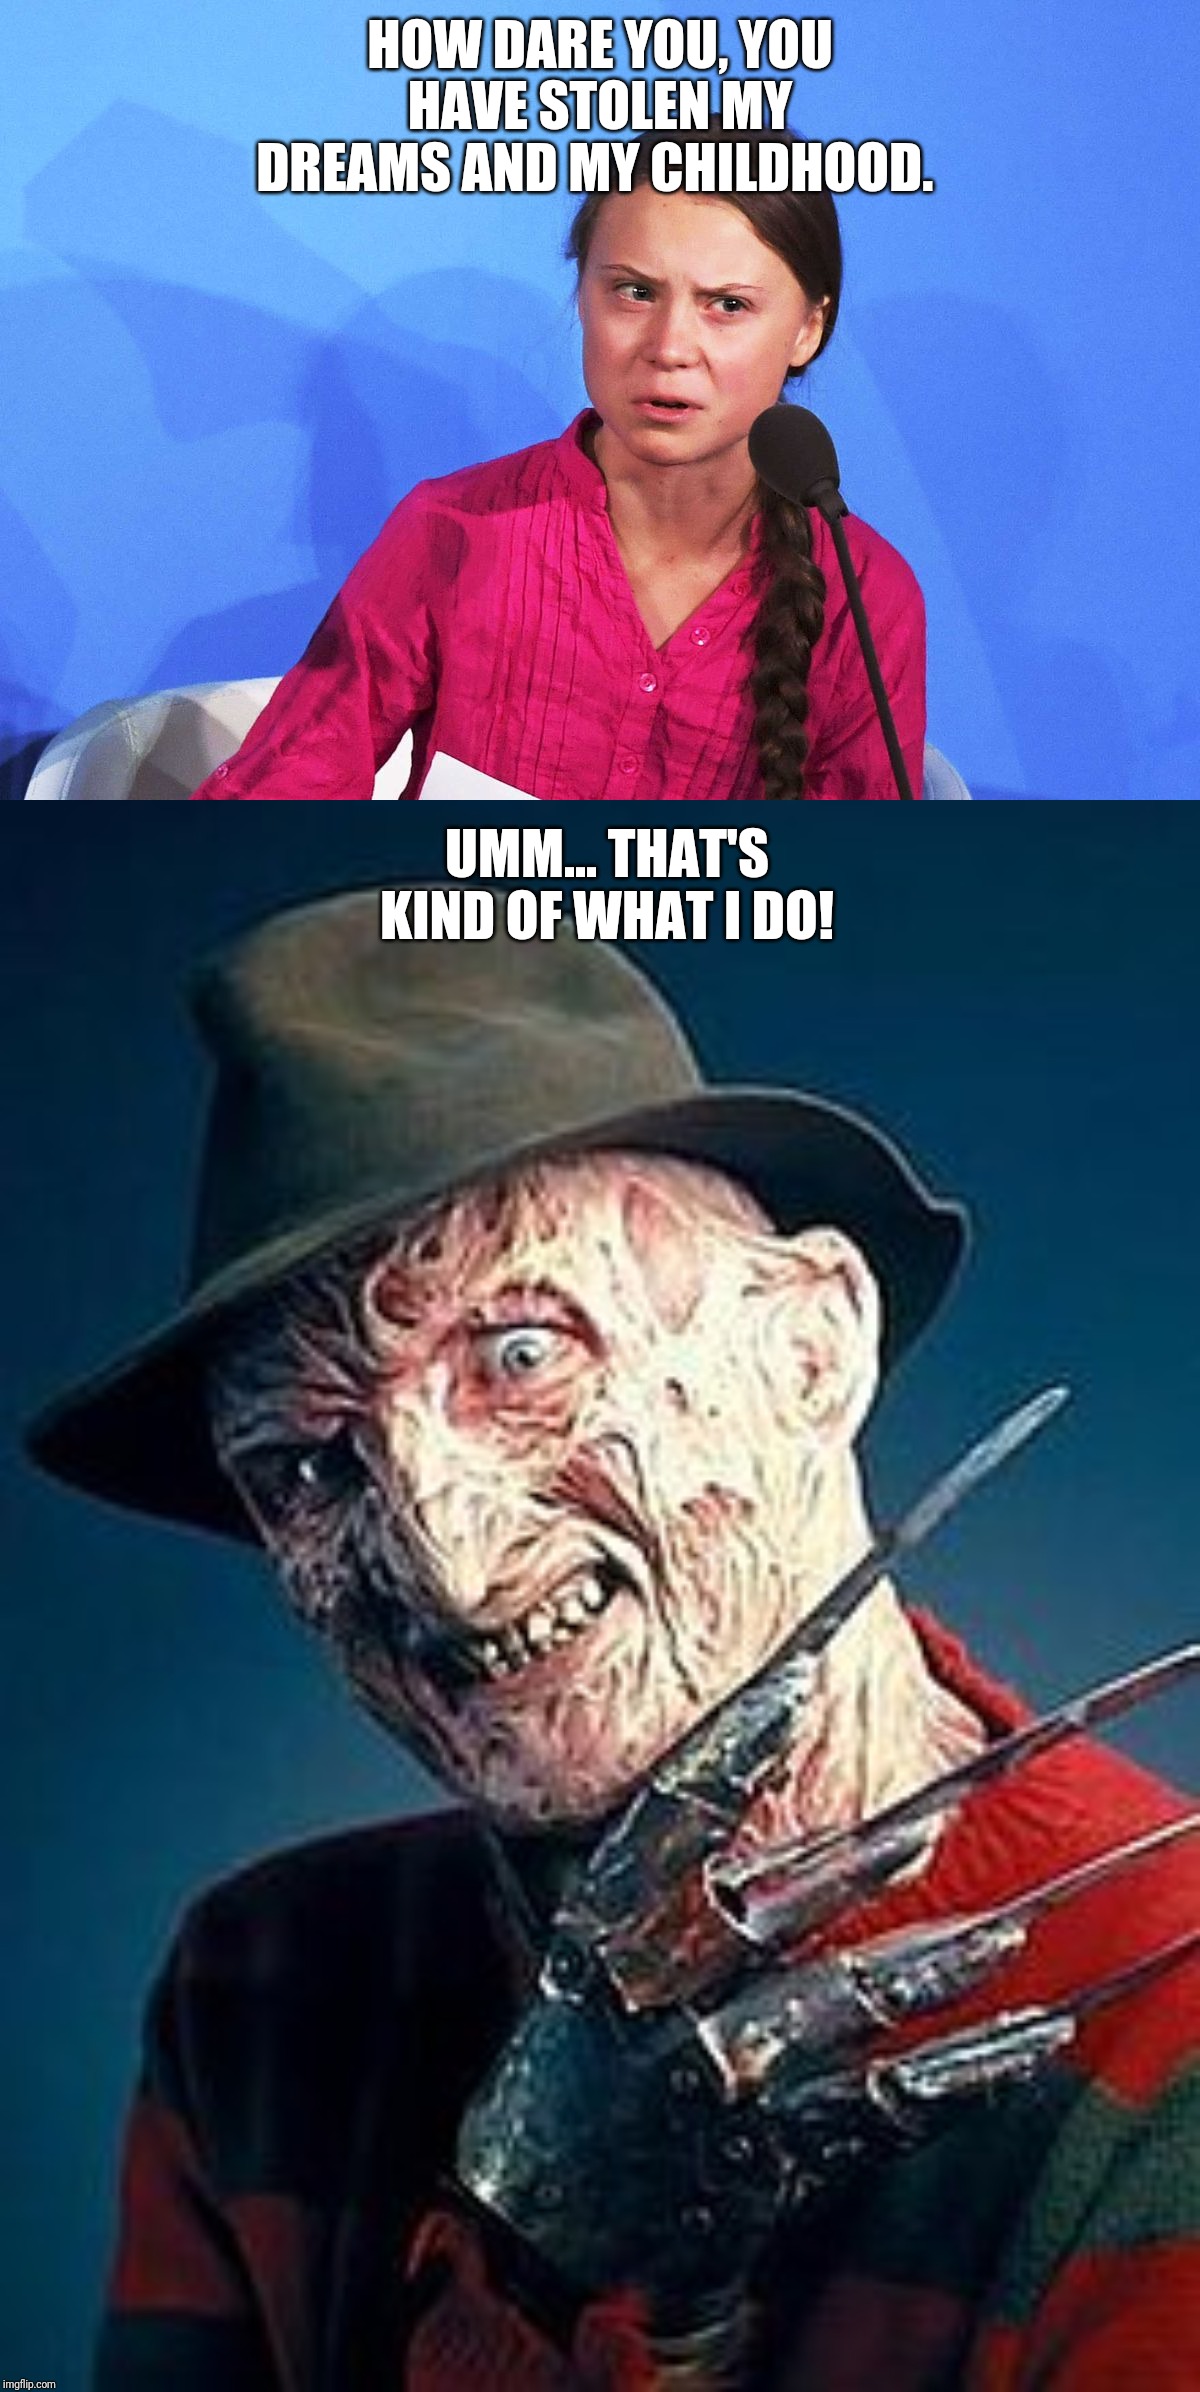 Thunberg krueger | HOW DARE YOU, YOU HAVE STOLEN MY DREAMS AND MY CHILDHOOD. UMM... THAT'S KIND OF WHAT I DO! | image tagged in freddy krueger face | made w/ Imgflip meme maker